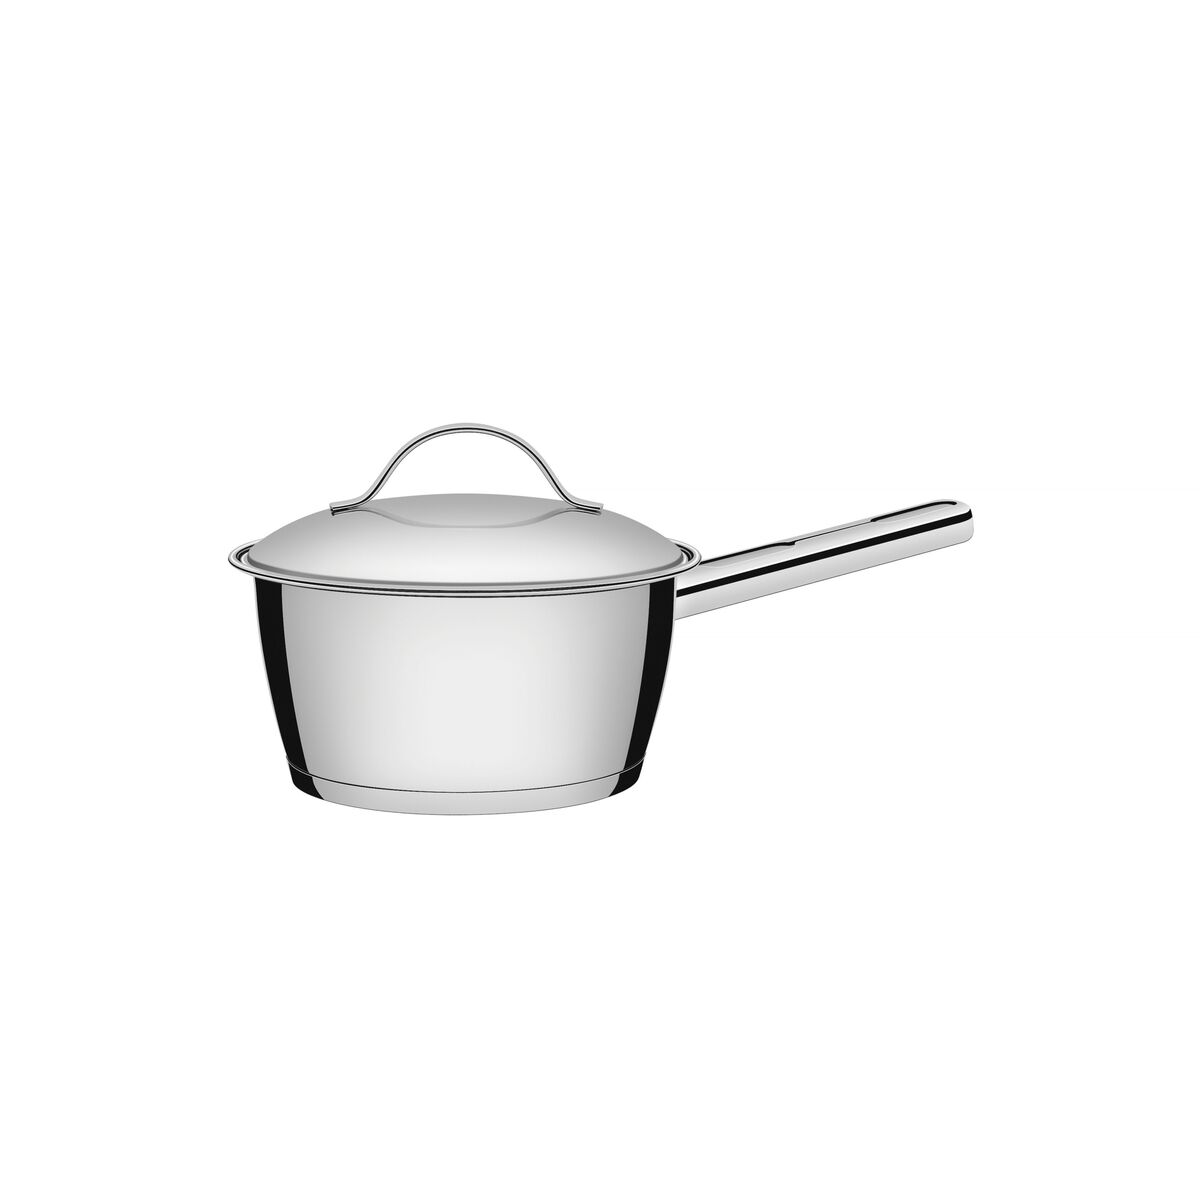 Tramontina Allegra stainless steel saucepan with tri-ply base, 16 cm 1.5 L